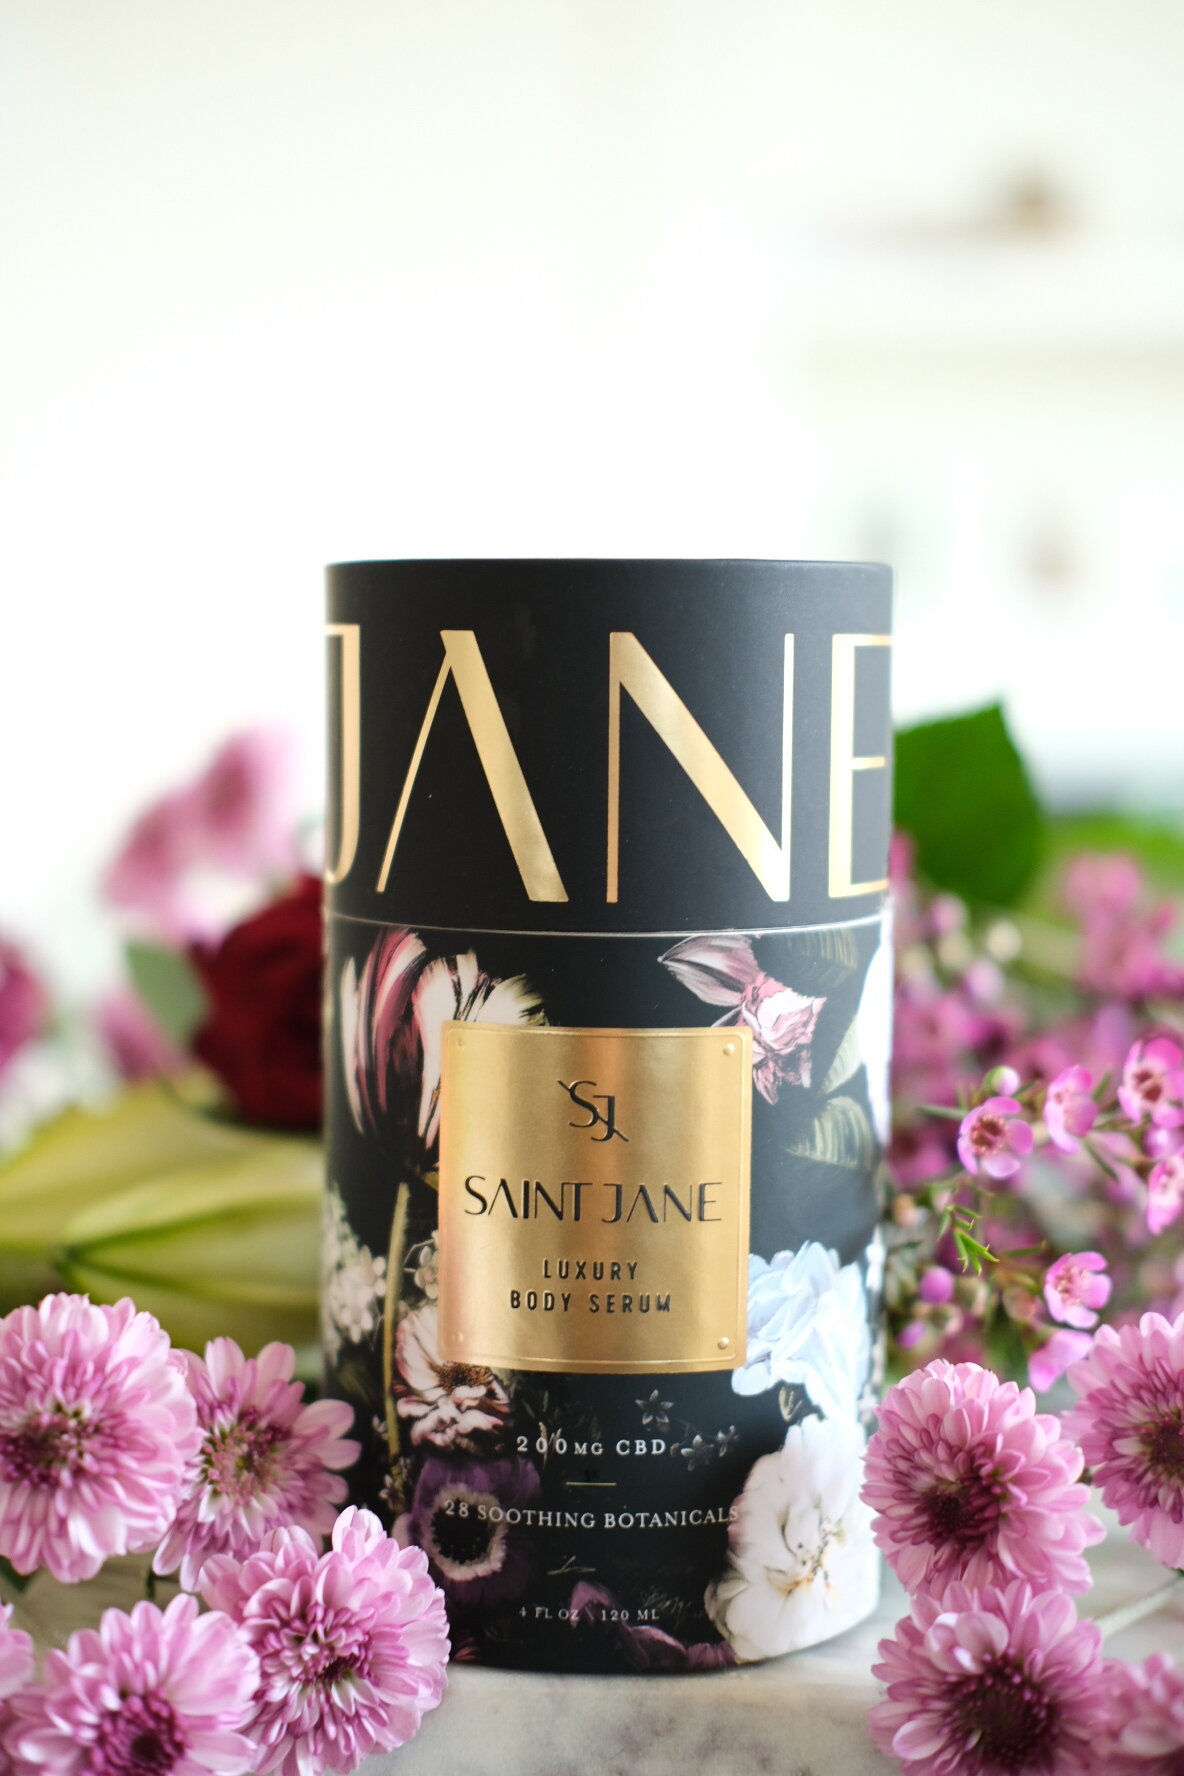 Saint Jane Beauty Luxury Body Serum. Saint Jane Beauty is a luxury CBD beauty brand which I delve into in this Saint Jane Review. Saint Jane Beauty infuses every formula with carefully-curated, sustainably sourced botanicals and high concentrations o